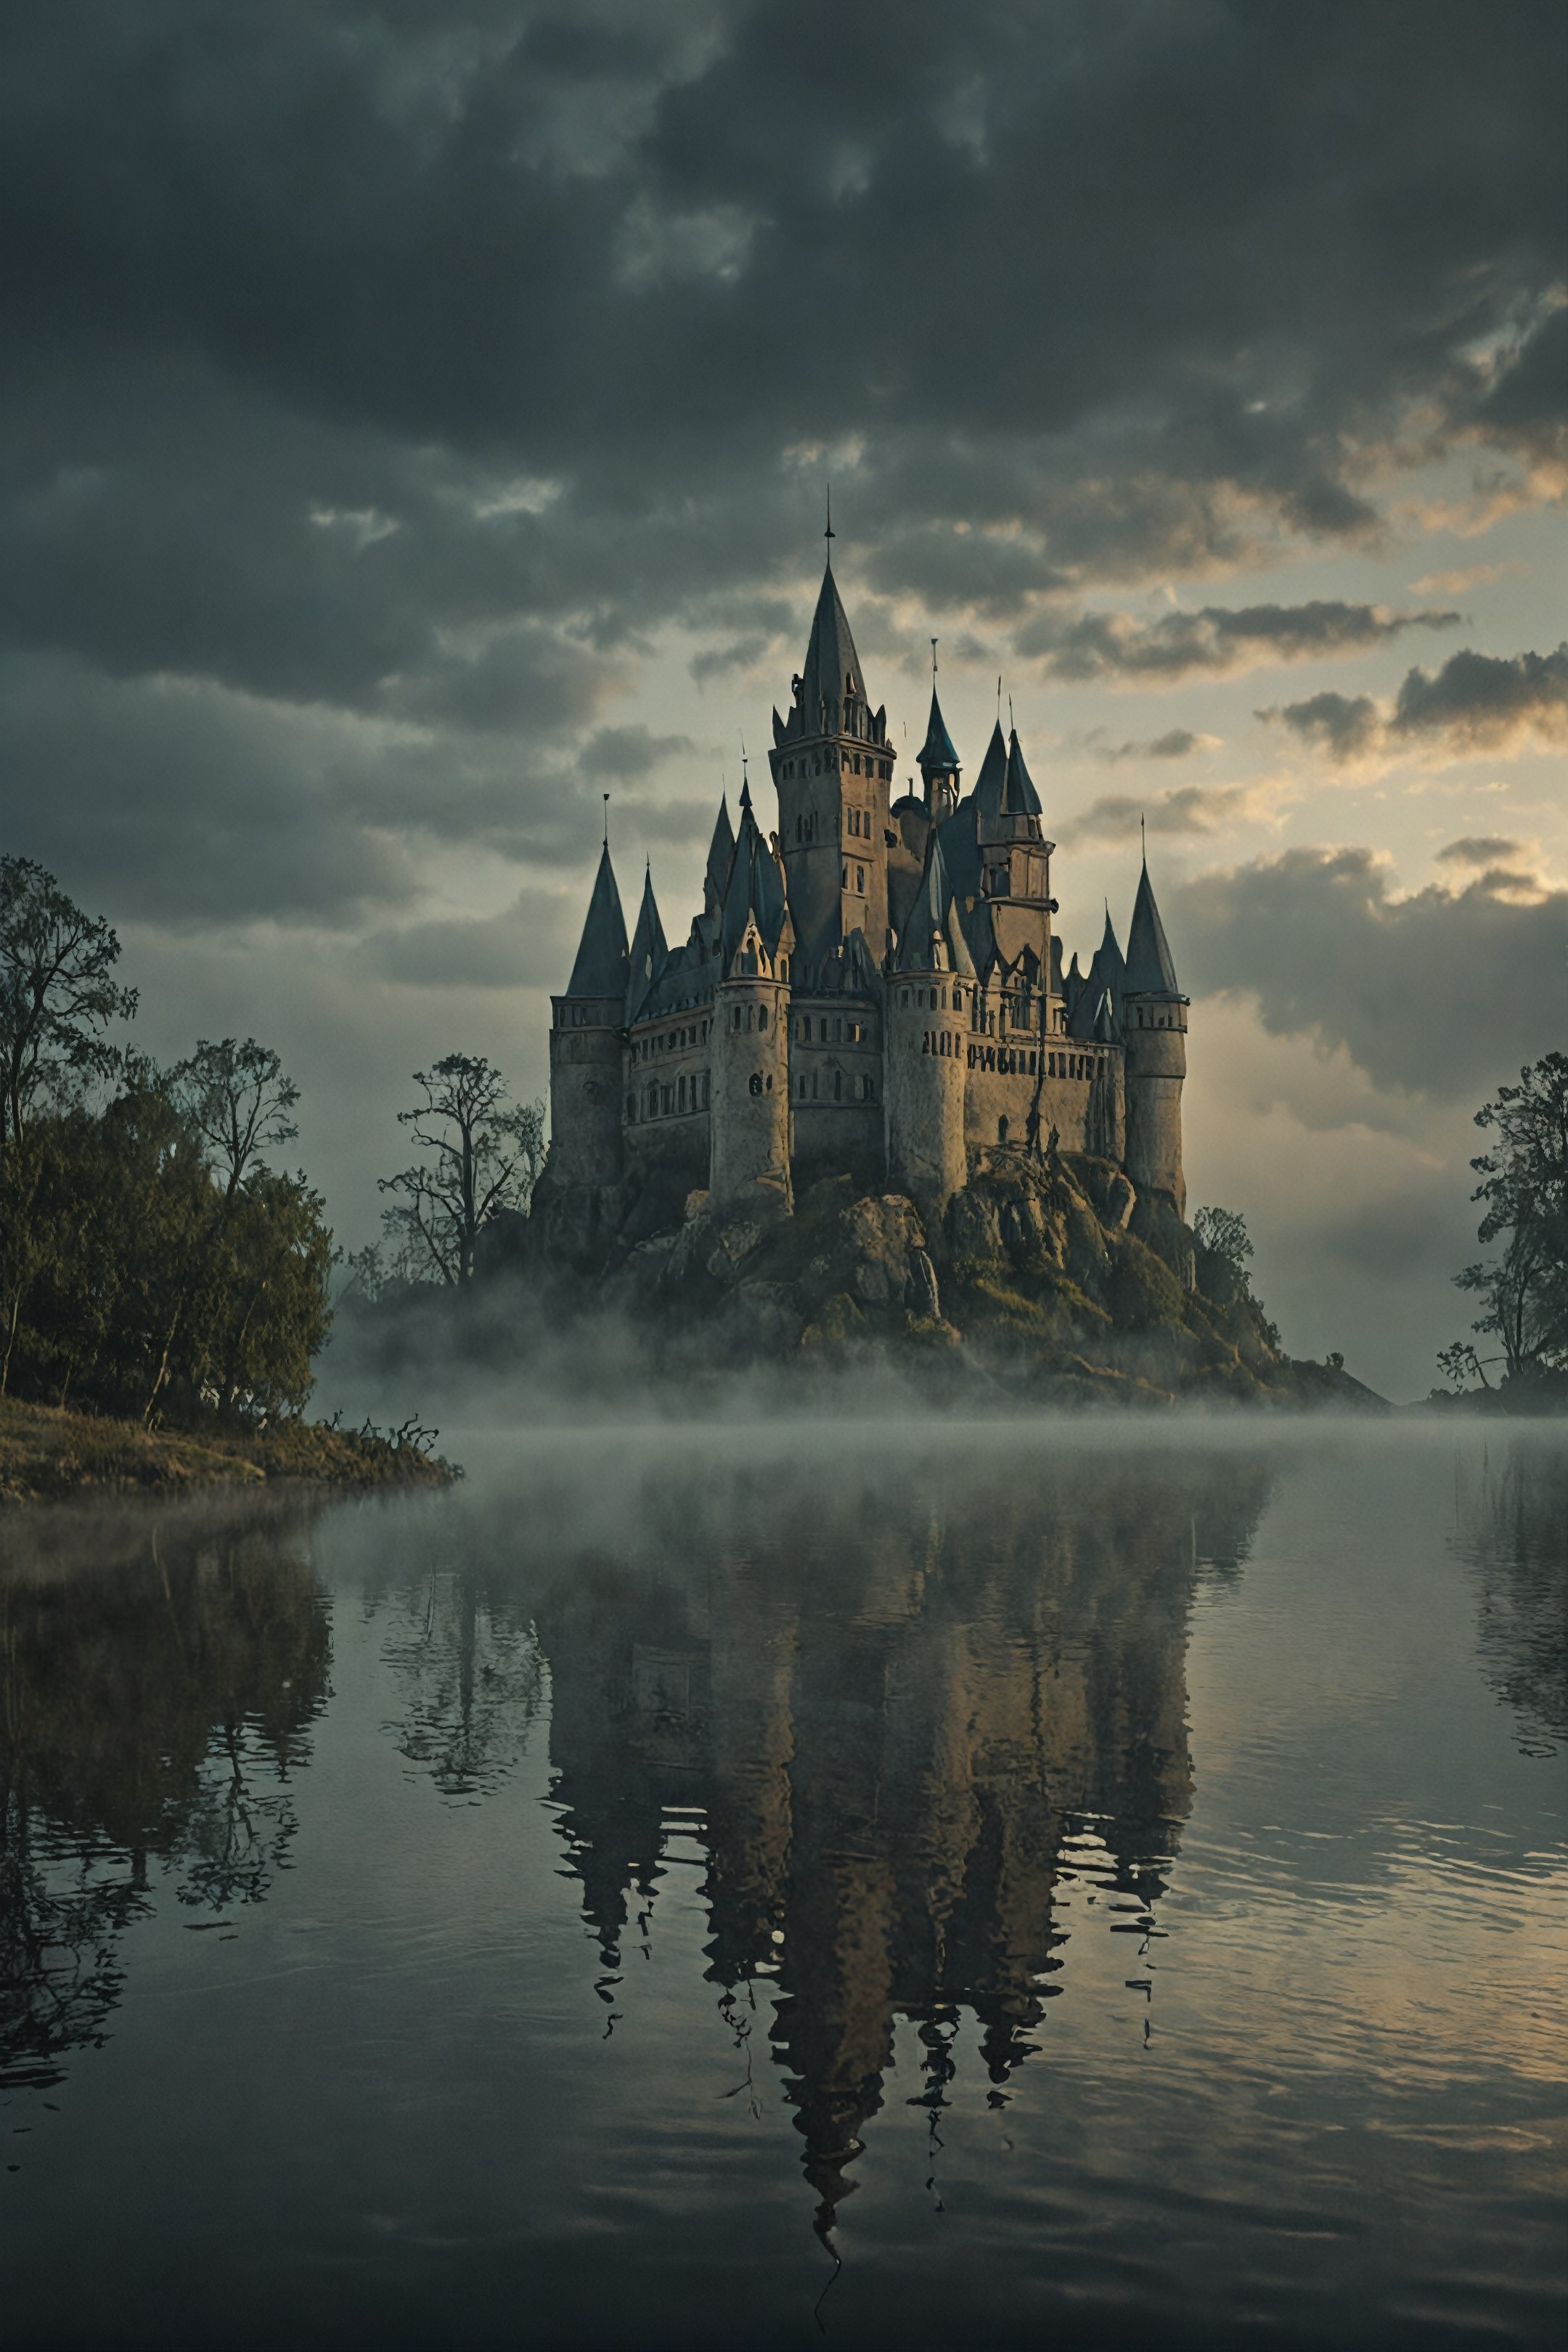 Horror-themed , create a picture of a mystical scene with a small castle in the middle of a calm lake. Create an extraordinary atmosphere with fog that envelops the castle and its surroundings. Highlight the reflection of the castle and the mist on the calm surface of the water. Illuminate the scenery with a dramatic sky showing celestial phenomena or intense cloud formations. Emphasize the magical and fantastical elements to create a captivating image that transports the viewer into a world of enchantment.
 , Ultra-HD-details, true to life, HDR image, High detail resolution, high detailed cloth, cinematic lighting, realistic, sharp focus, (very detailed), ((4K HQ)), depth of field, f/1.2, Leica, 8K HDR, High contrast, bokeh, realistic shadows, vignette, epic, . Eerie, unsettling, dark, spooky, suspenseful, grim, highly detailed
,photo r3al,Movie Still